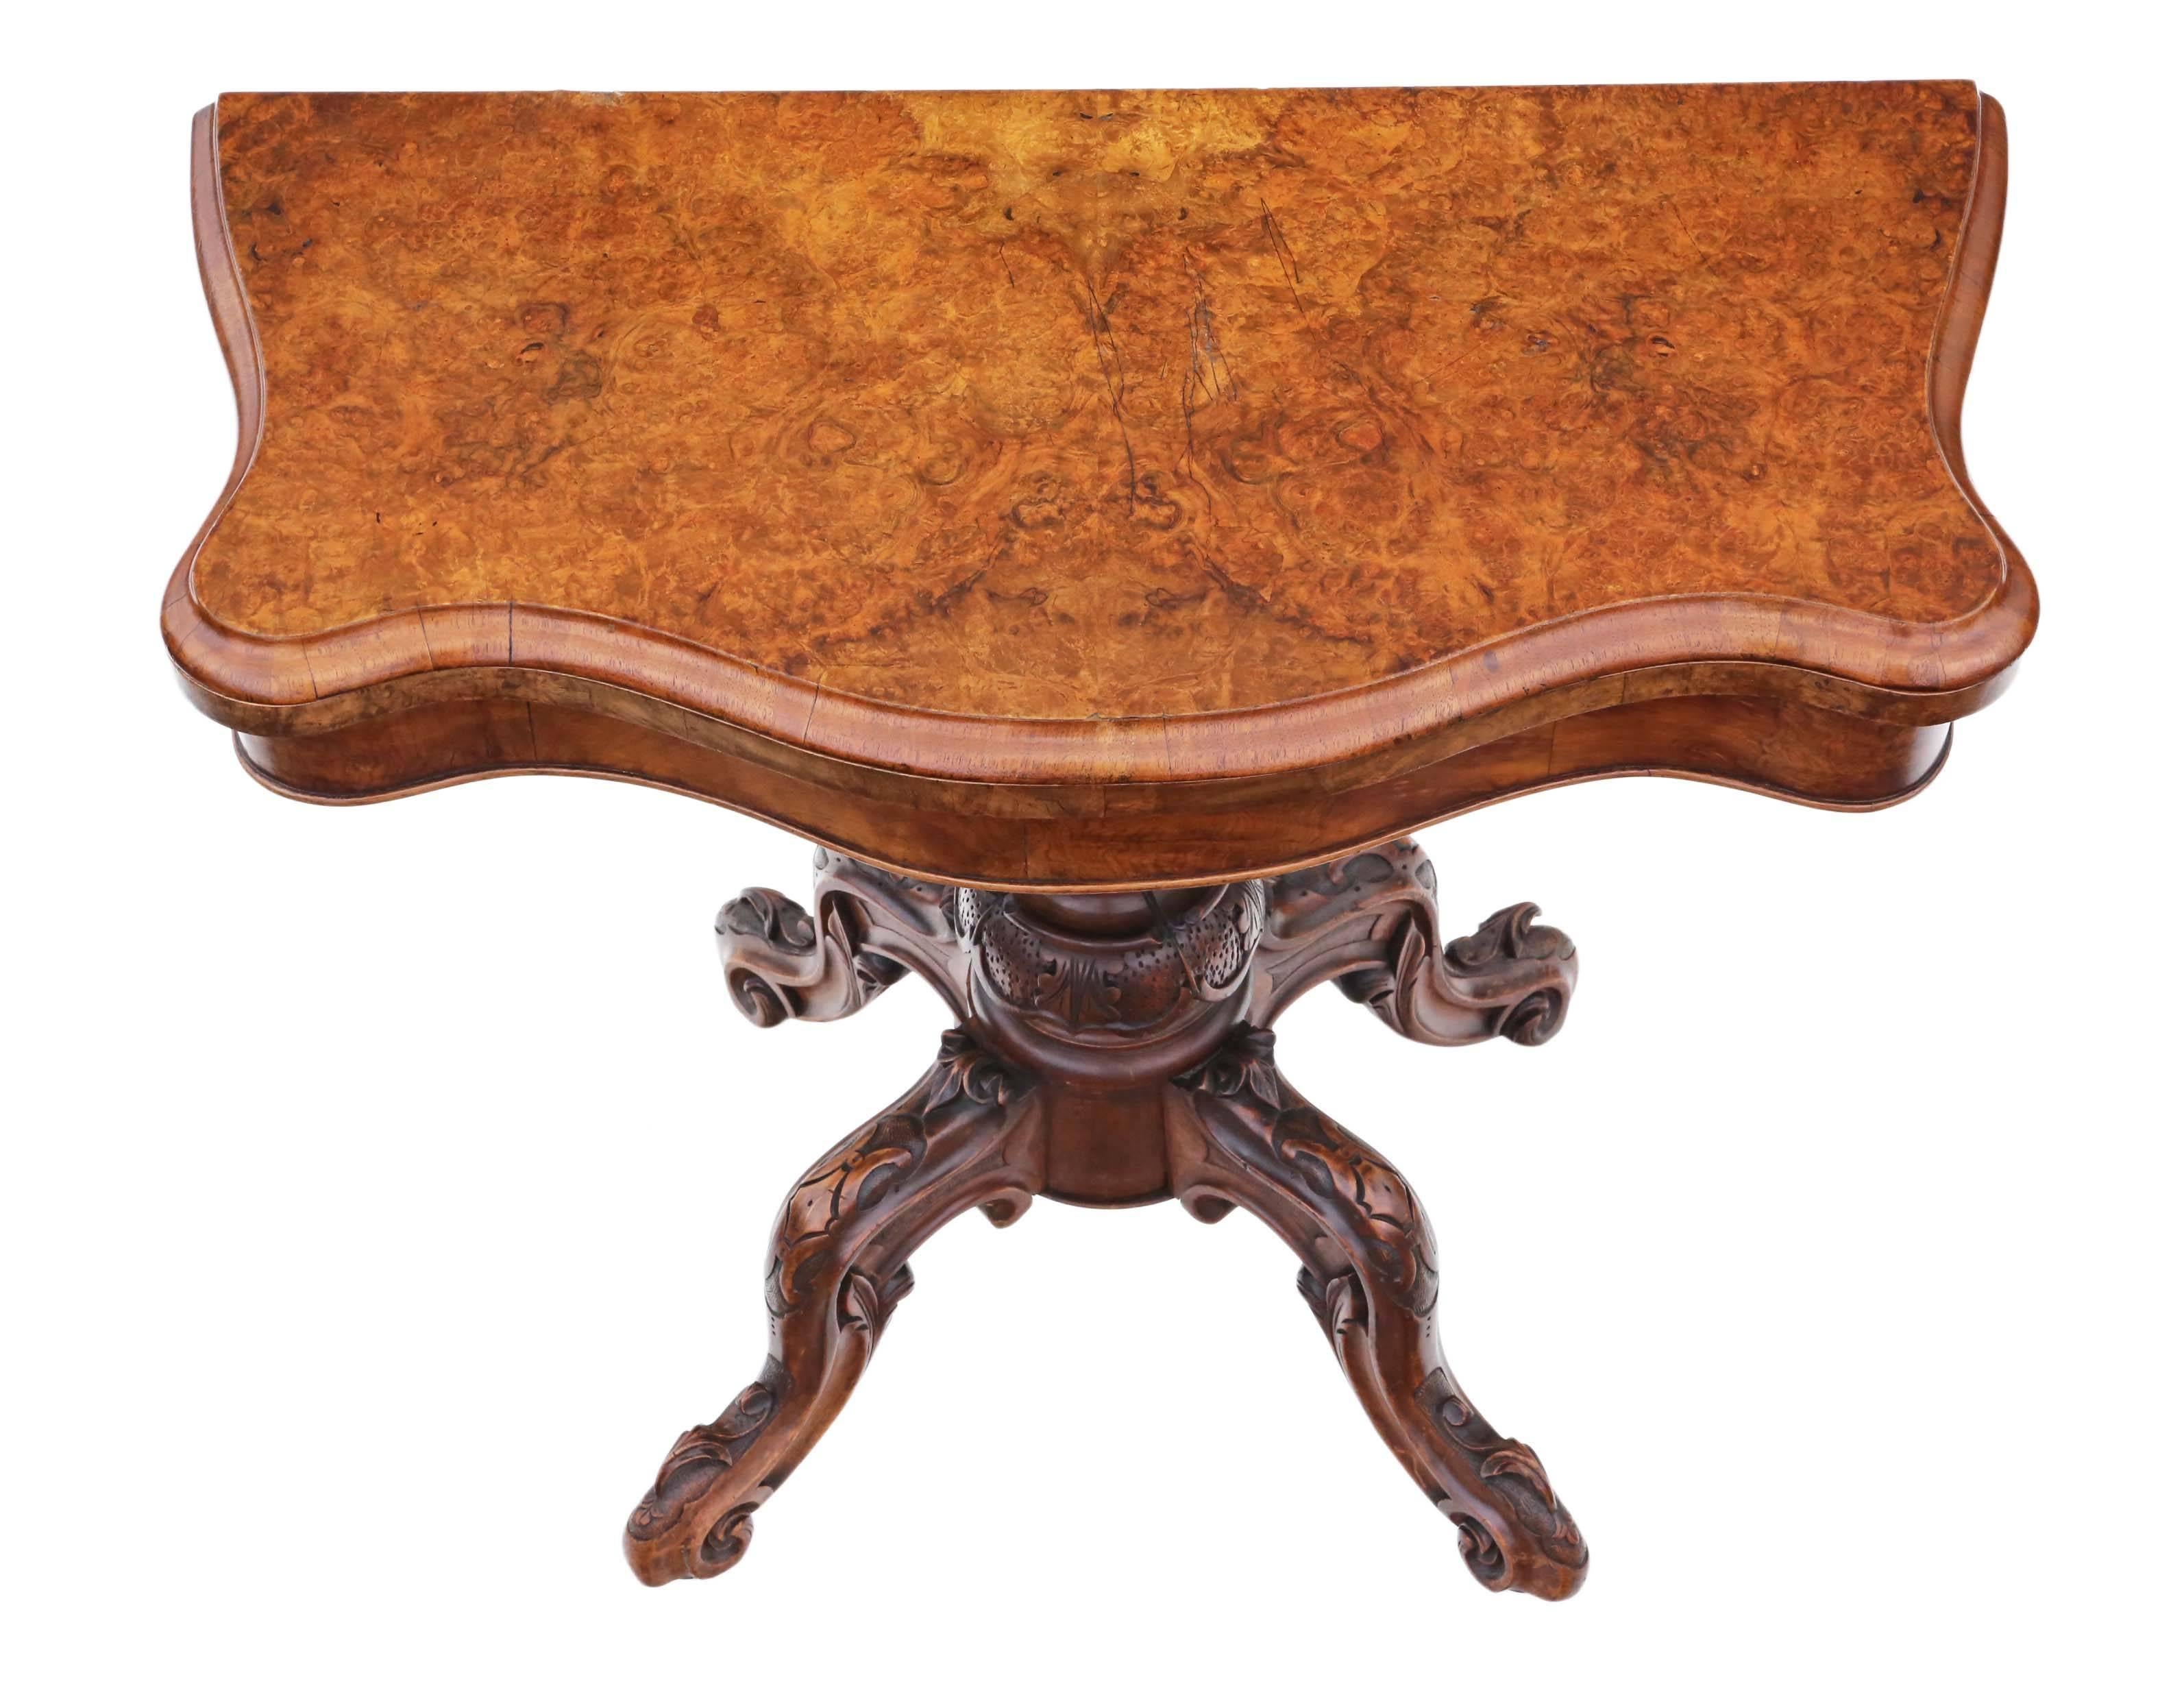 Late 19th Century Antique Quality Victorian circa 1870 Burr Walnut Serpentine Folding Card Table For Sale